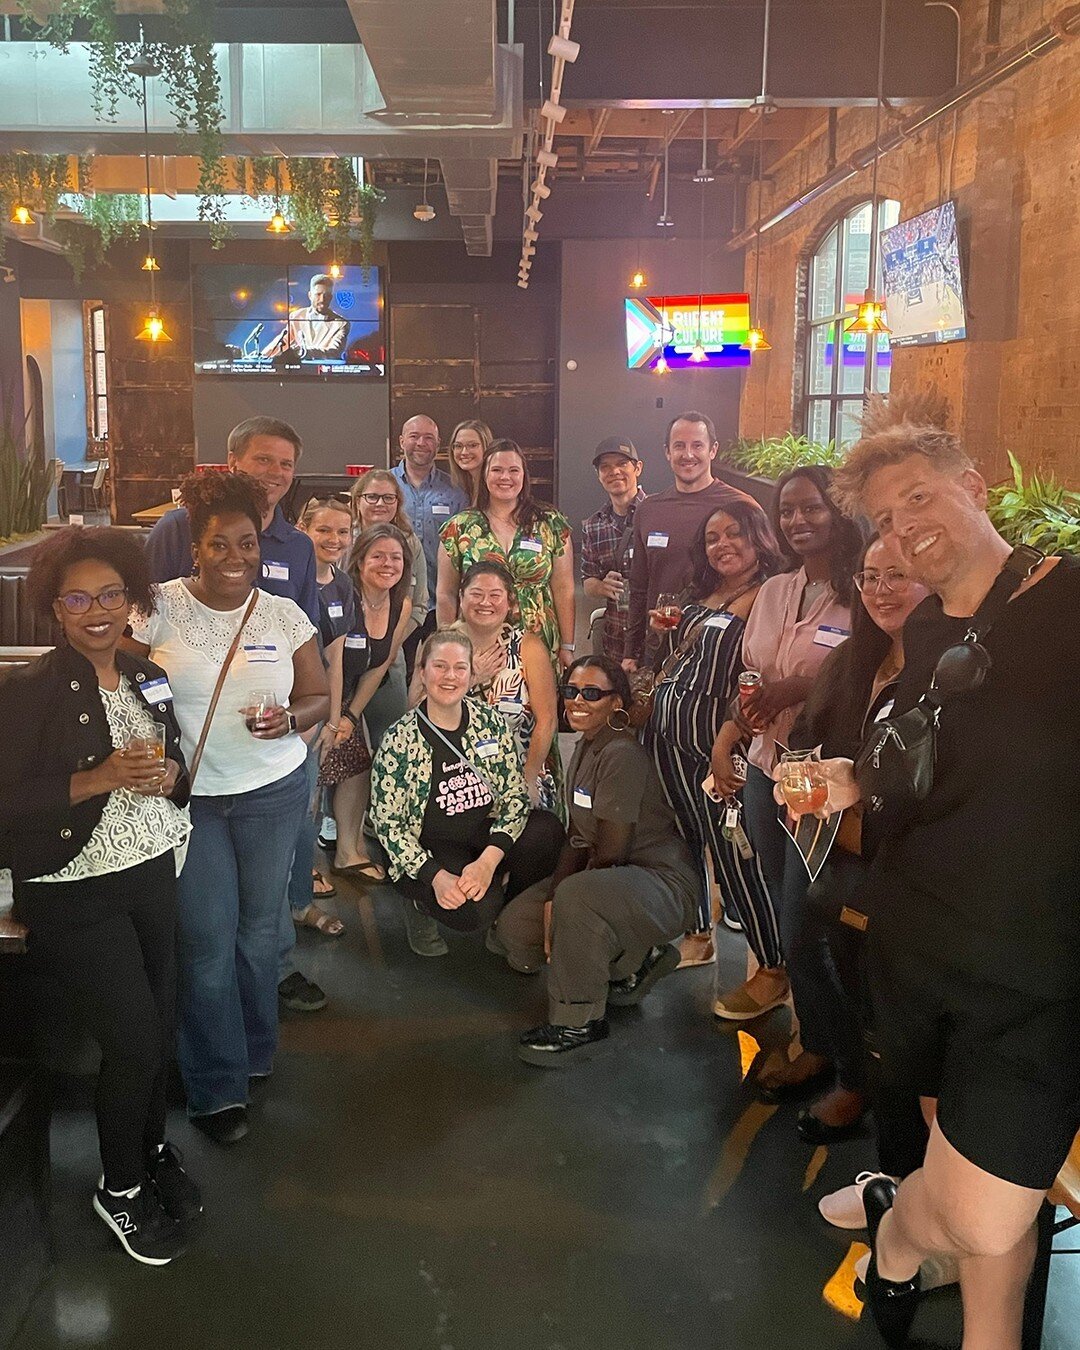 It was so great to catch up and mingle with everyone that came out to the vendor social. We know some of you have already had some pop-ups, but it was a refreshing time of conversation and laughs before the E+E market season begins.

We can't wait to